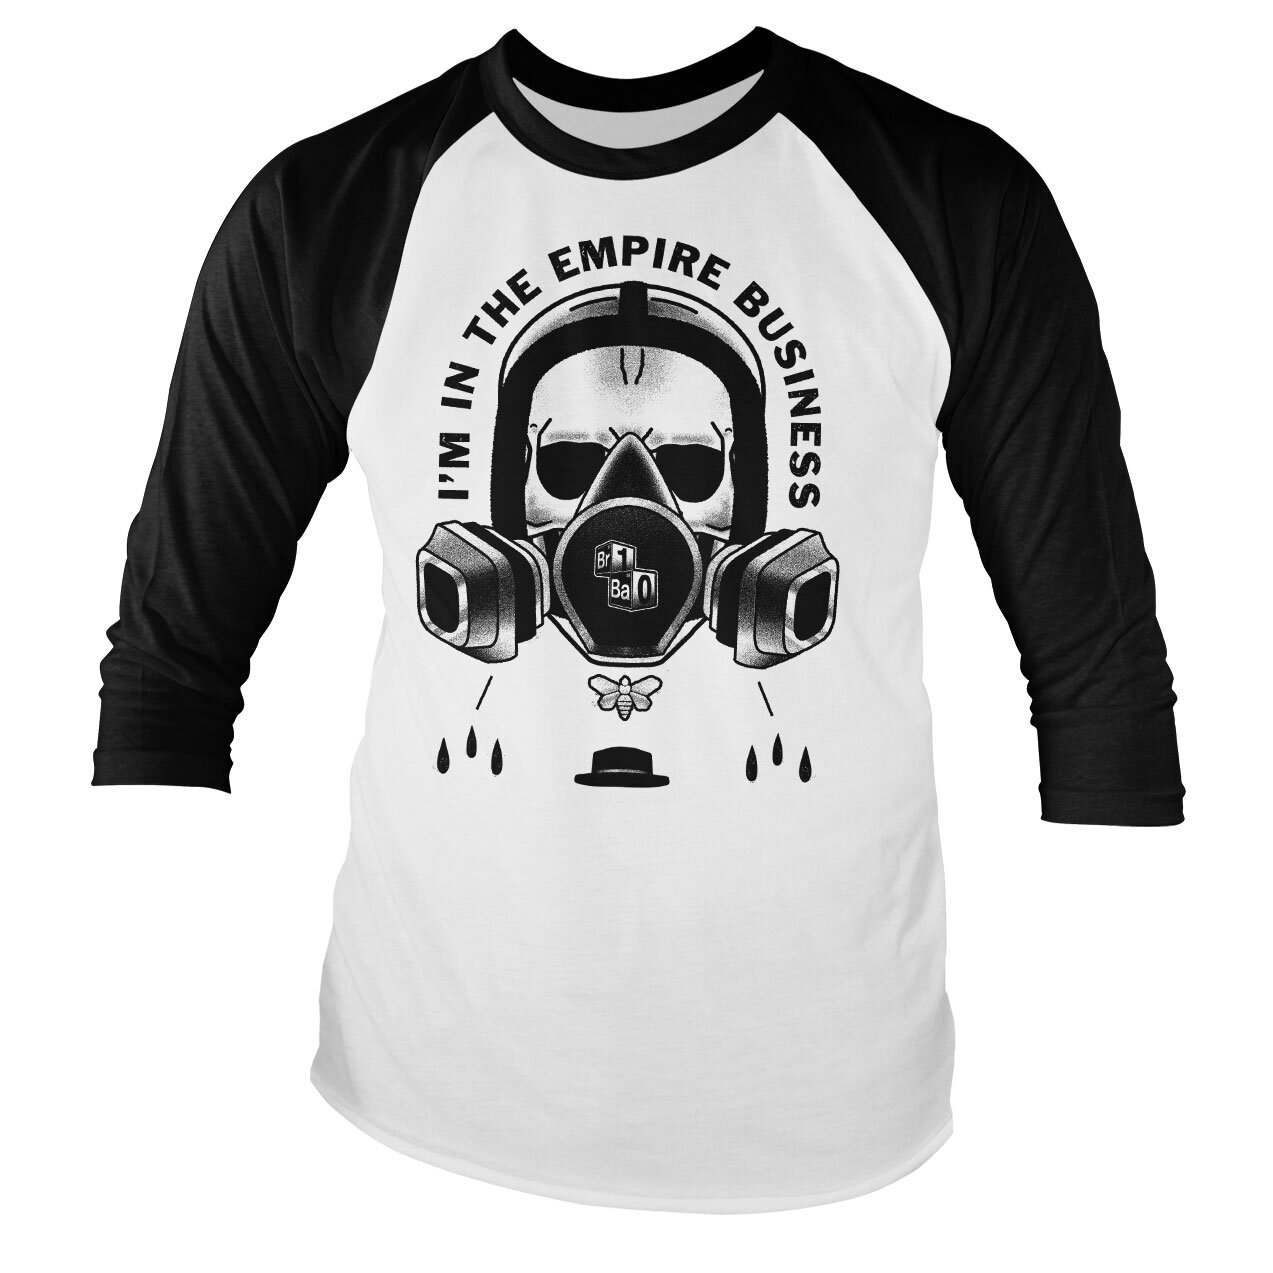 I'm In The Empire Business Baseball Long Sleeve Tee